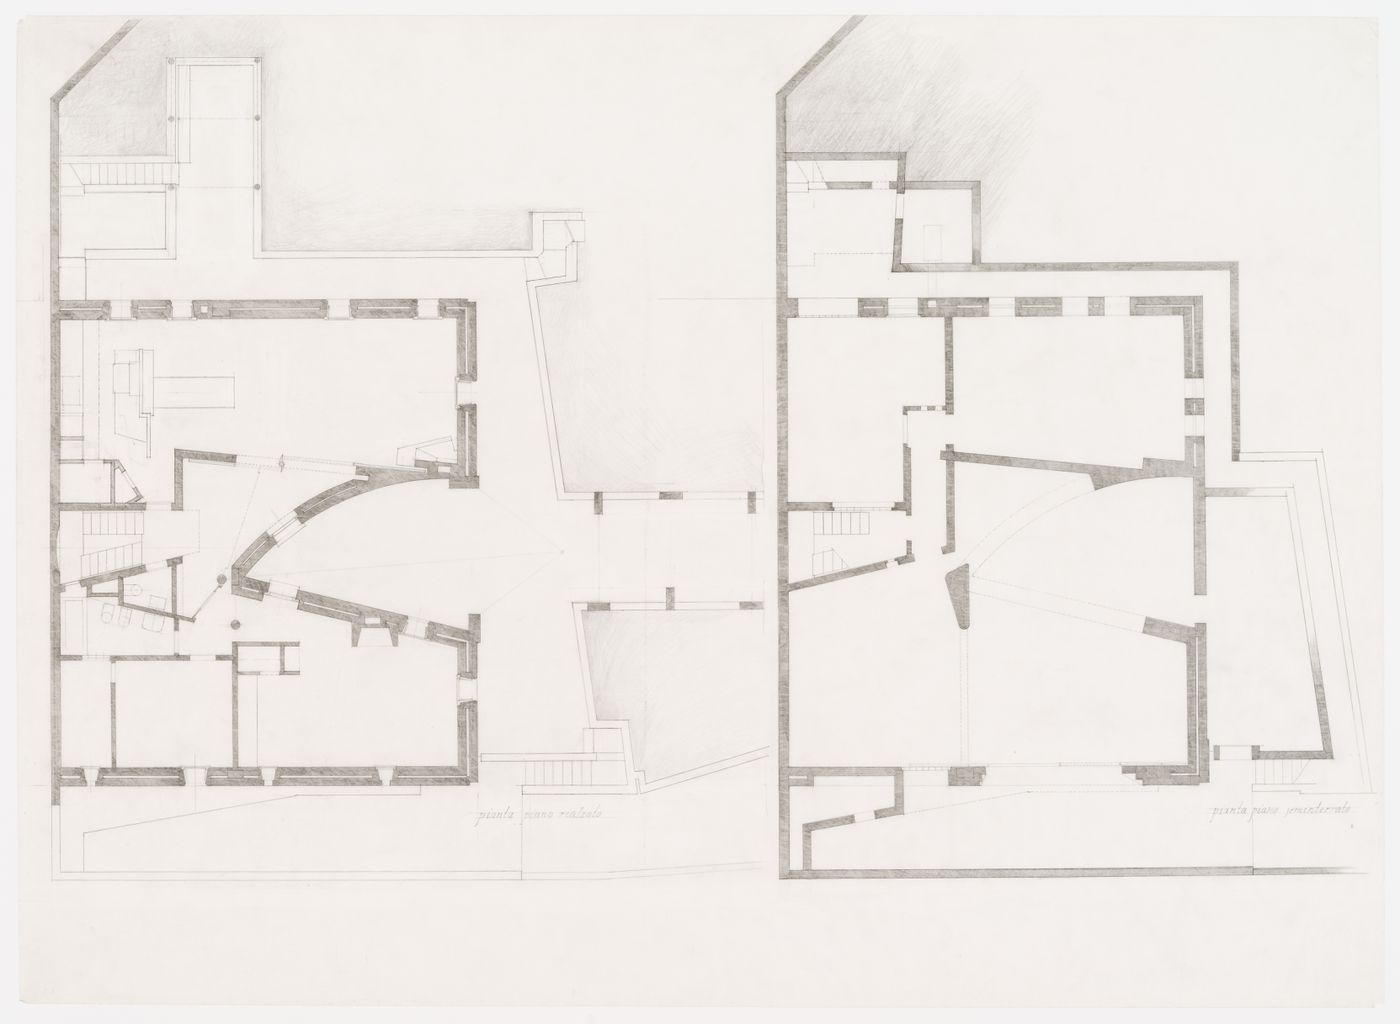 Plans of ground floor and basement for Casa Miggiano, Otranto, Italy